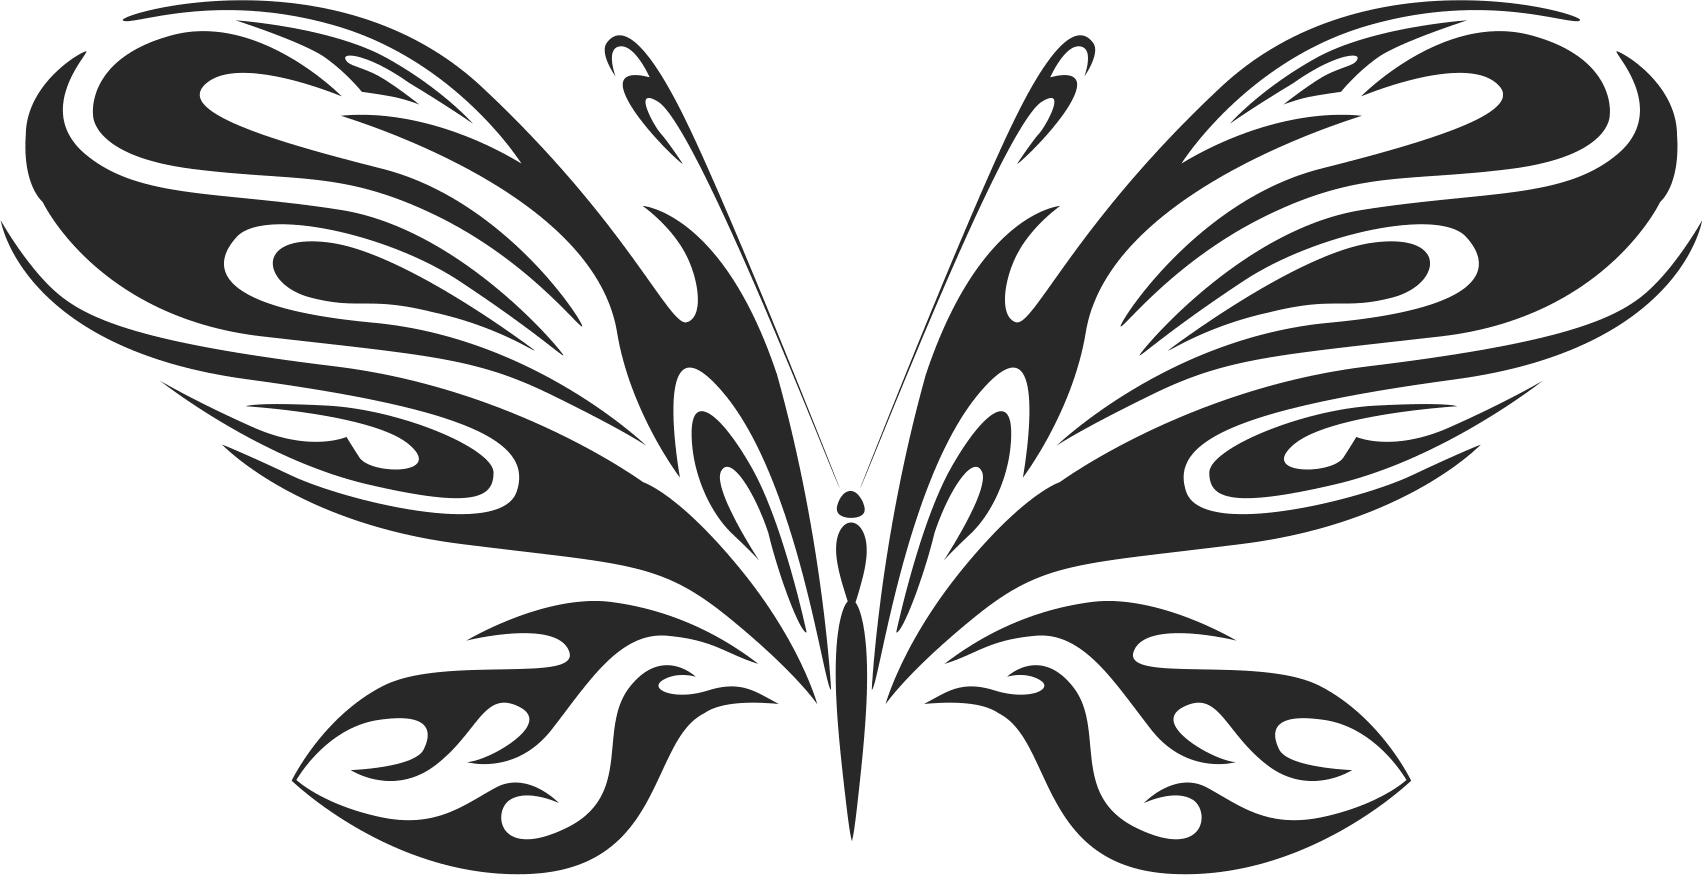 Butterfly Silhouette 020 Free CDR Vectors Art